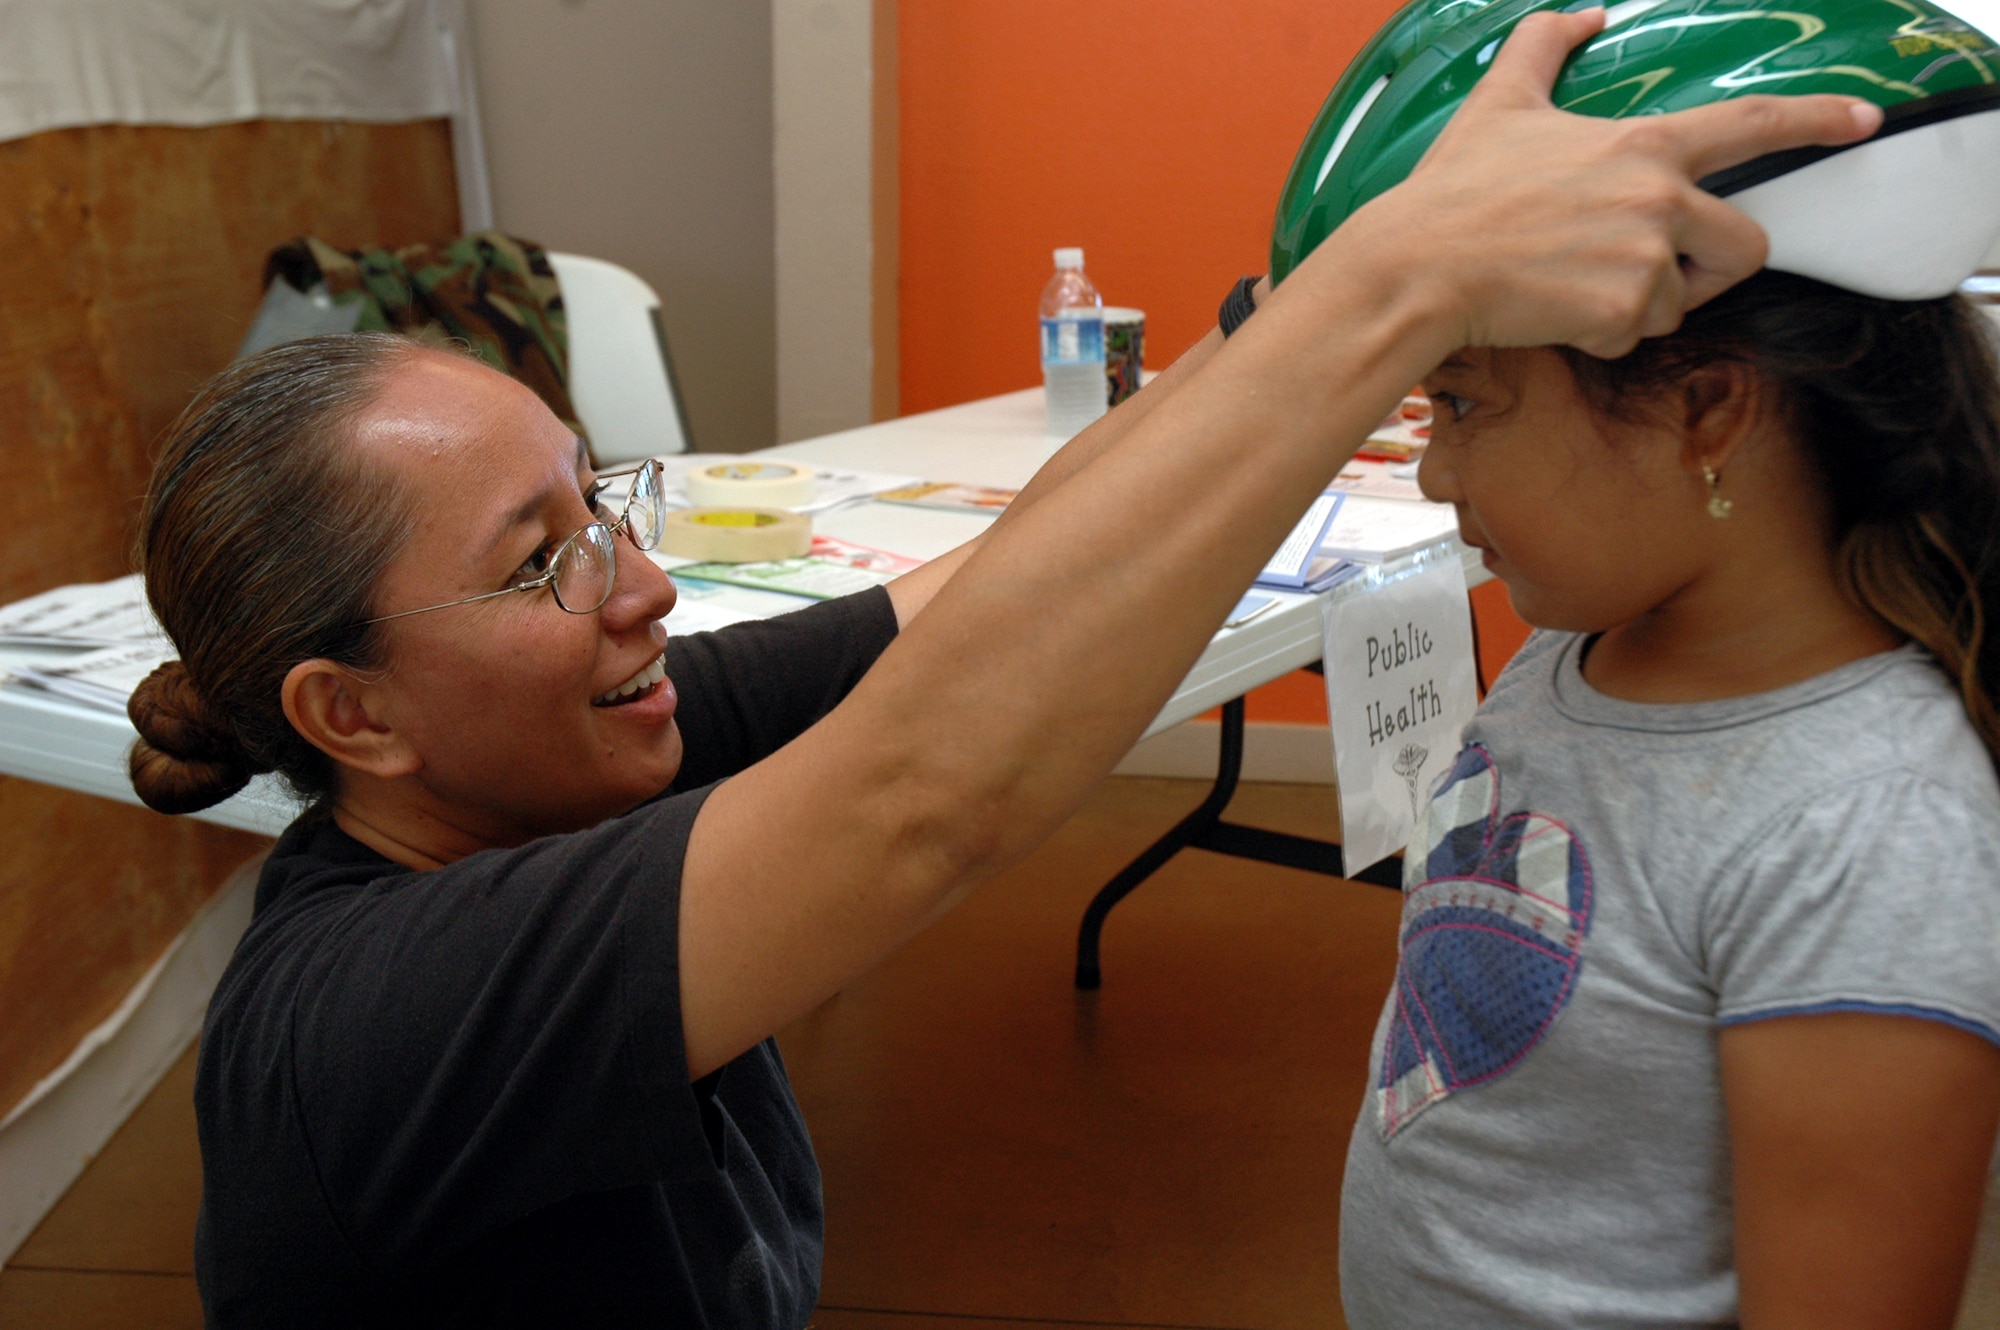 Capt. Elzadia Kainae, 154th Medical Group, clinical nurse, measures a bike helmet on a young child during the Innovative Readiness Training, July 16, in Waianae, Hawaii.  Innovative Readiness Training is an opportunity for Guard members to complete training while performing free medical services to the community. (U.S. Air Force photo/Tech. Sgt. Betty J. Squatrito-Martin)